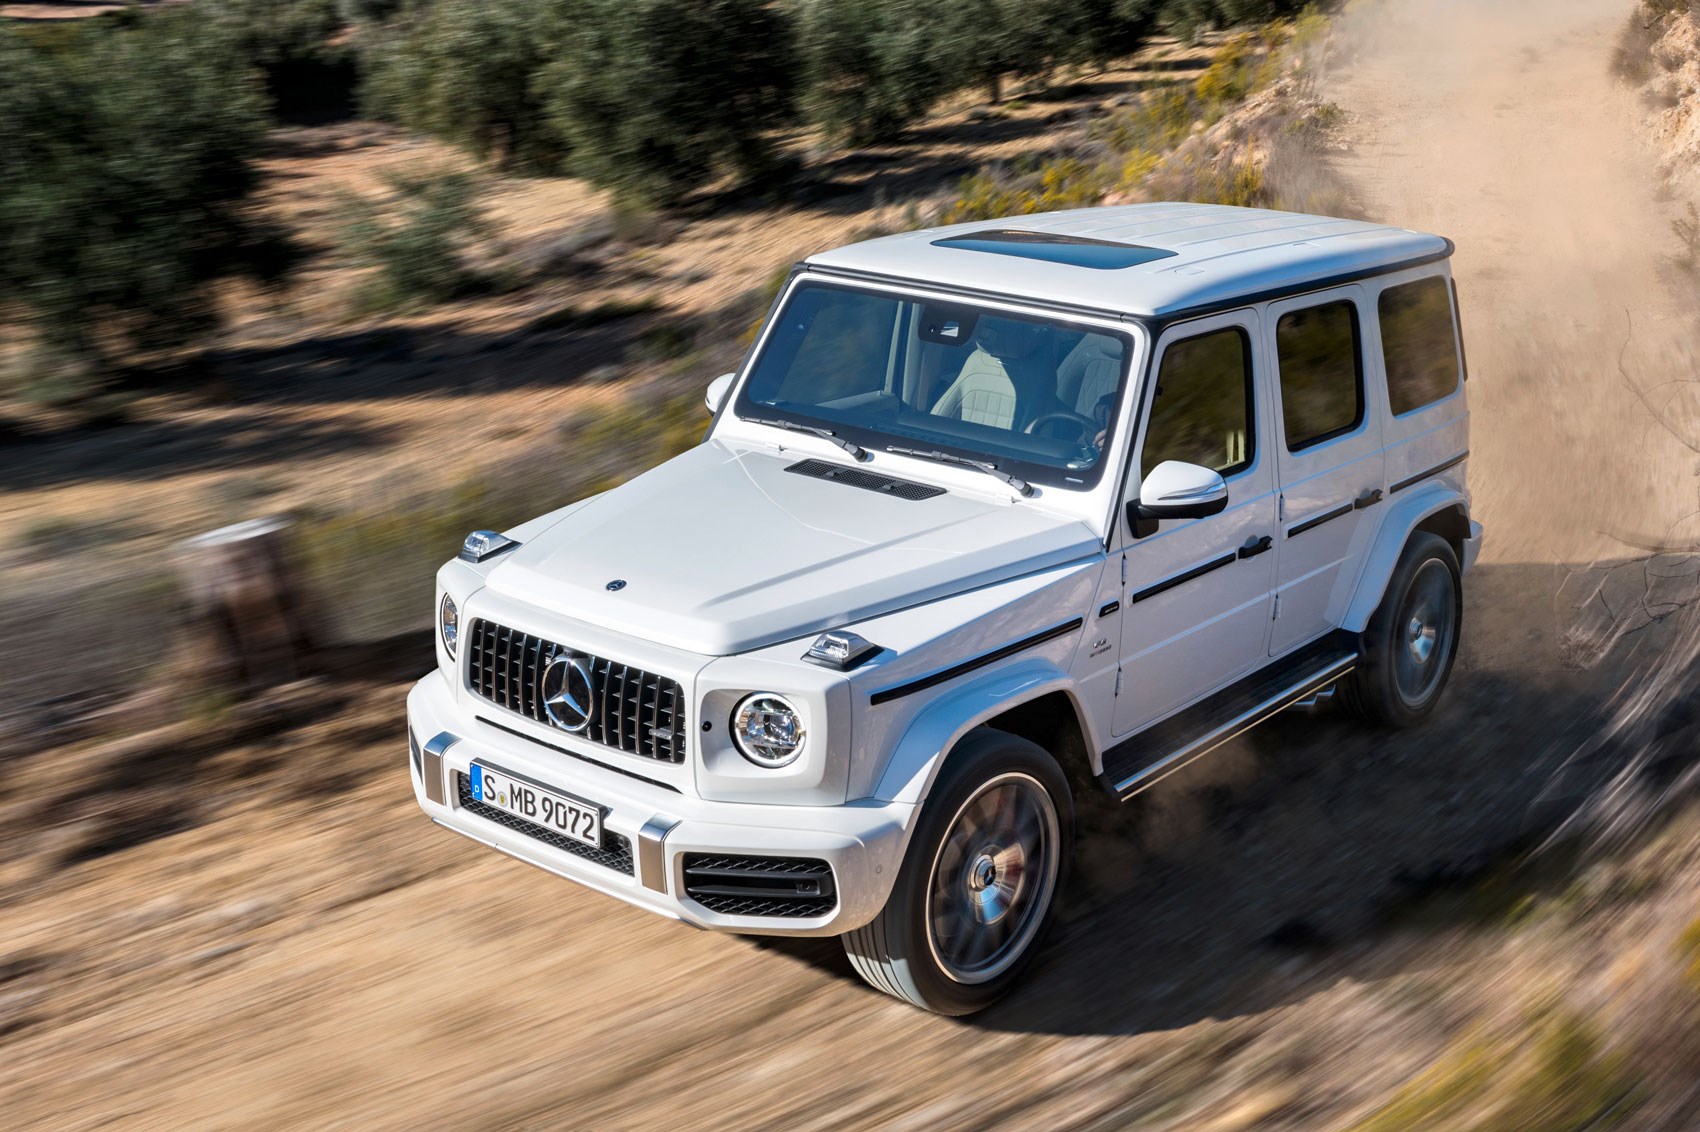 Faster Box: Mercedes-Benz Releases Photos of 2013 G63 AMG